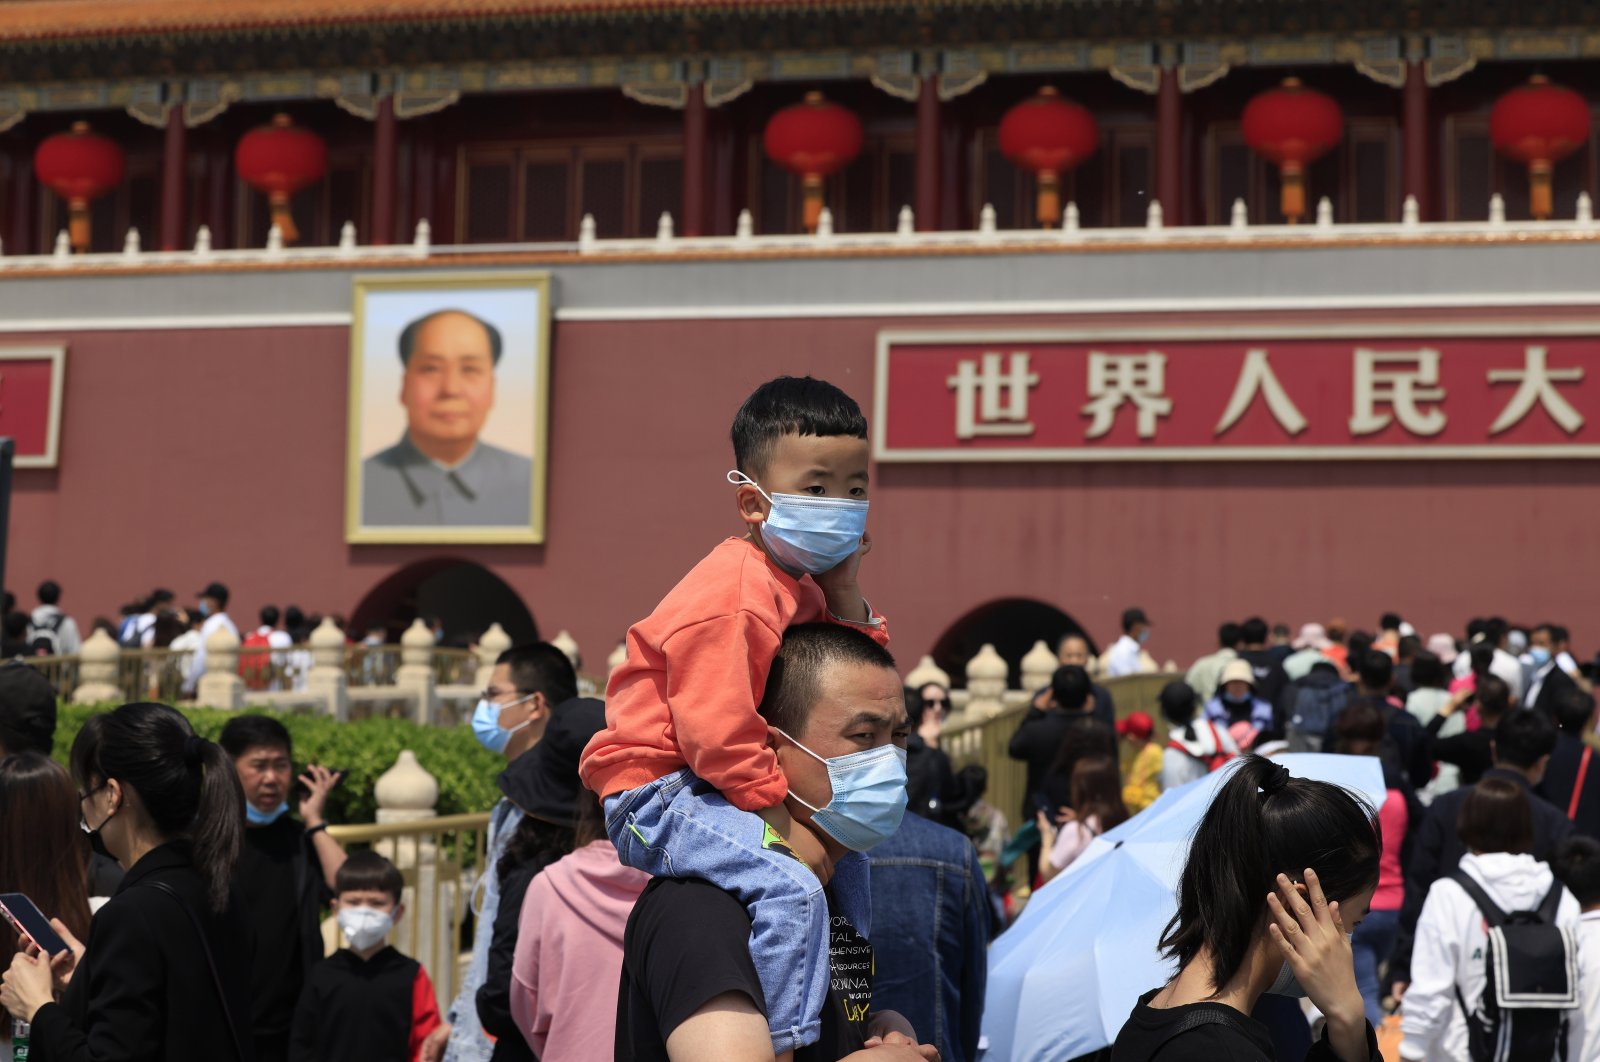 A man and child wearing masks visit Tiananmen Gate near the portrait of Mao Zedong in Beijing, China, May 3, 2021. (AP Photo)